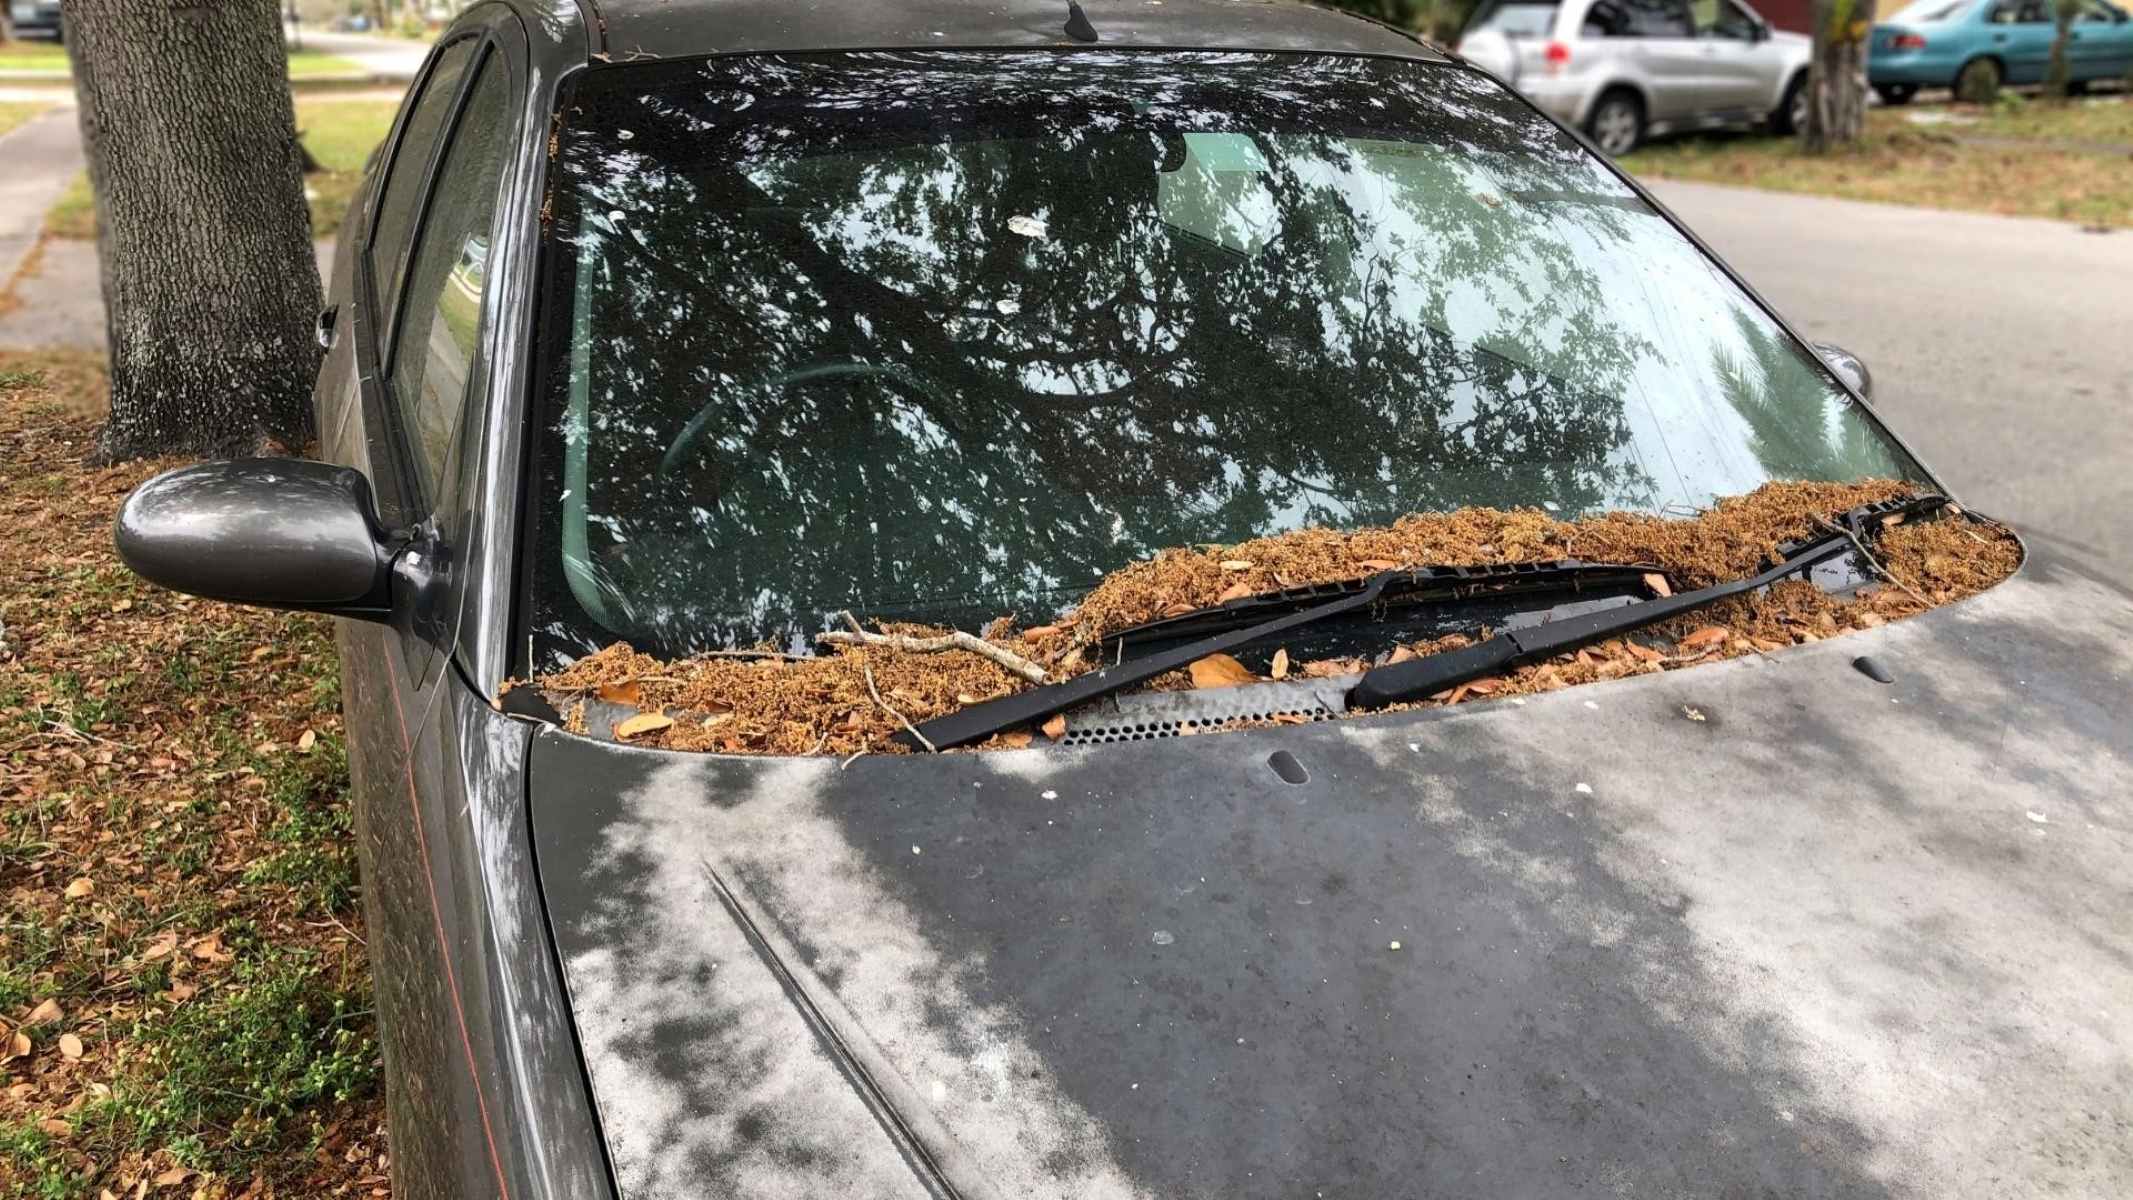 How To Get Tree Sap Off Windshield